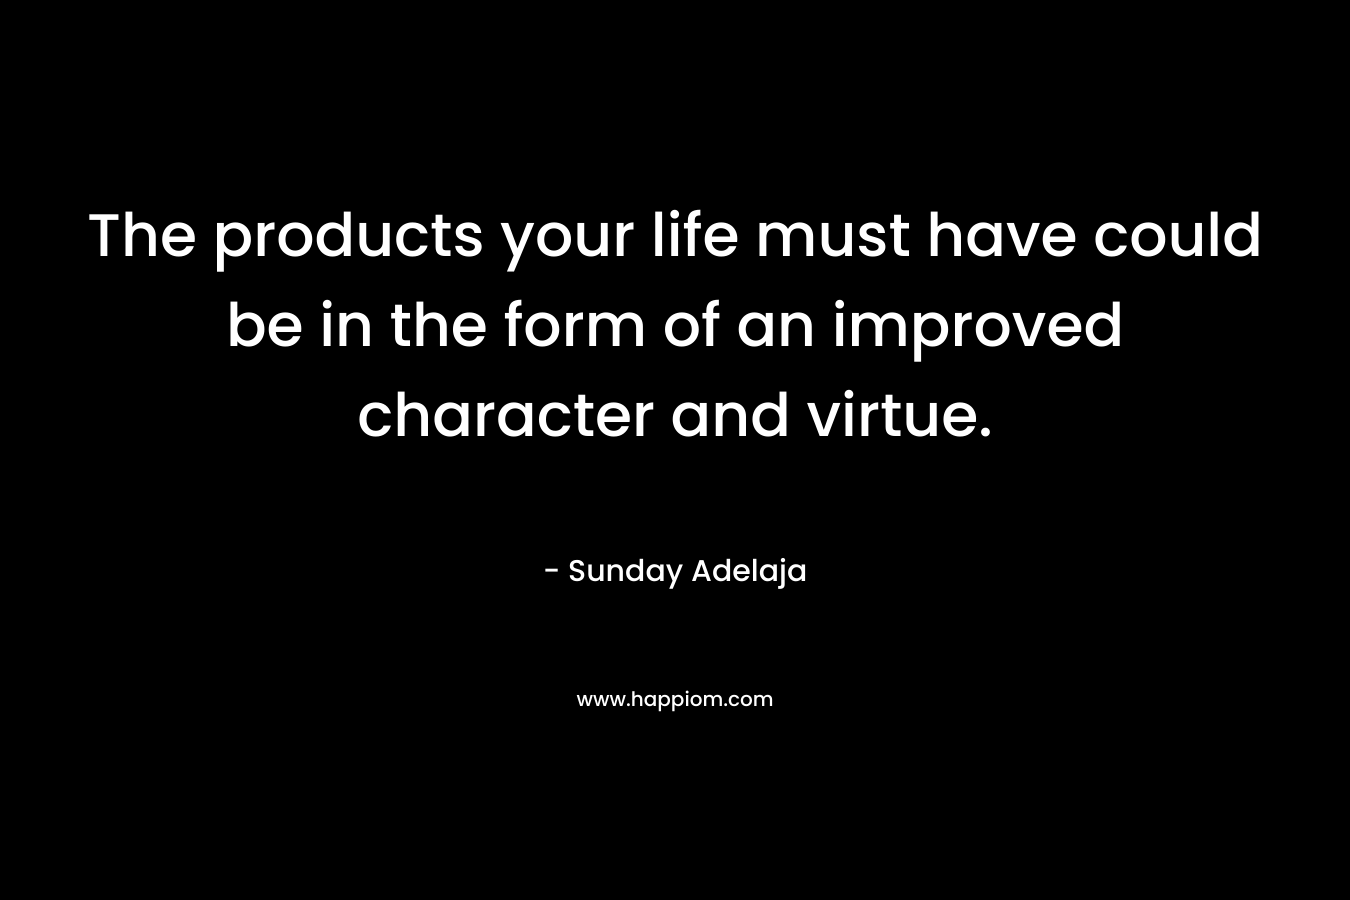 The products your life must have could be in the form of an improved character and virtue.